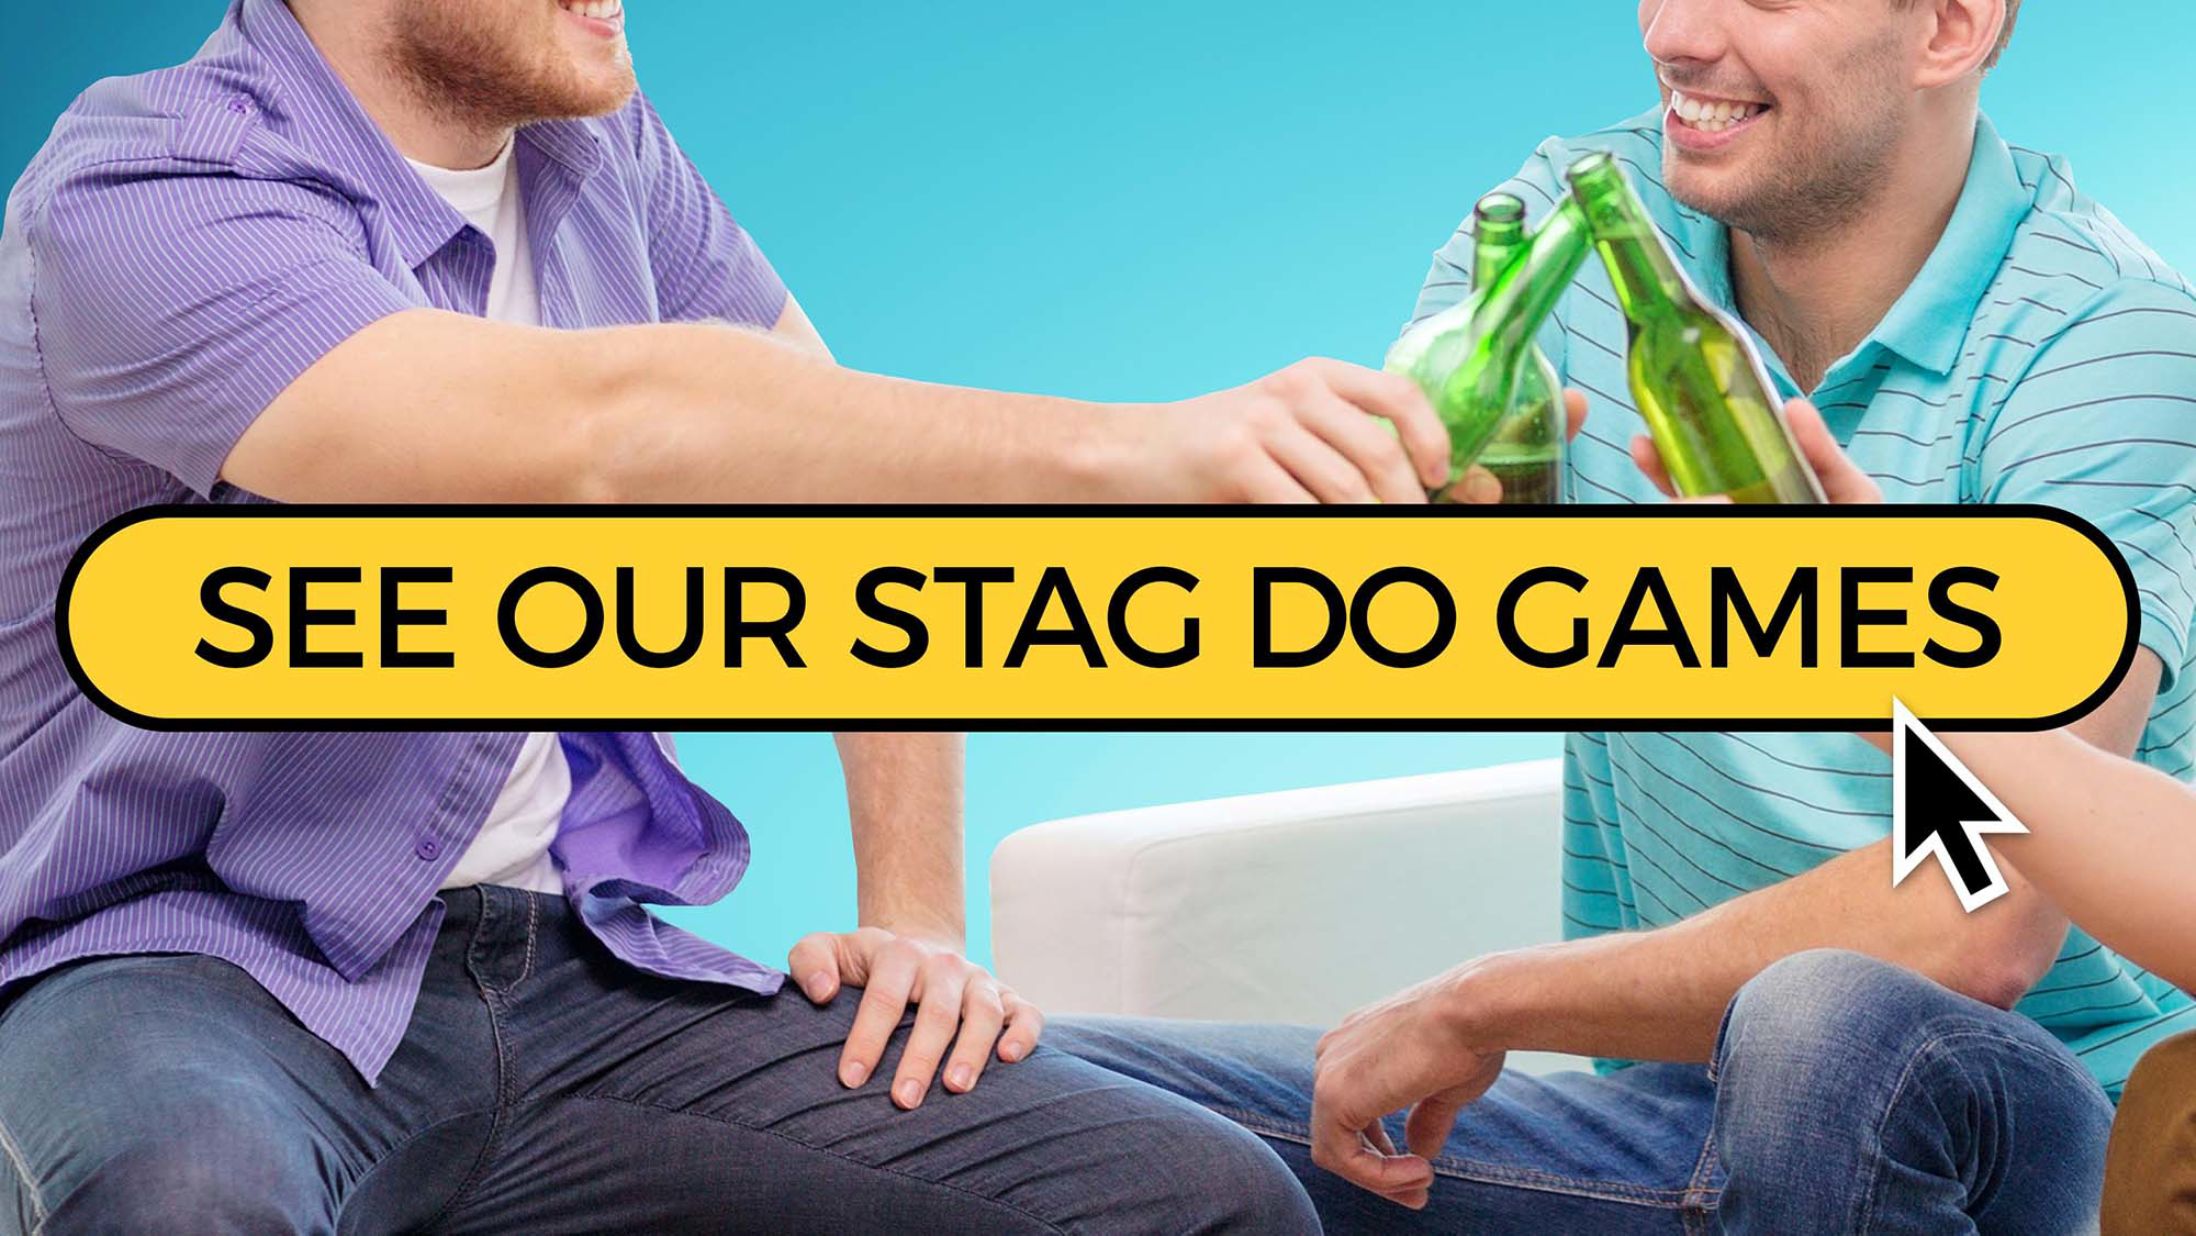 Stag Do Games - The Best Man Site